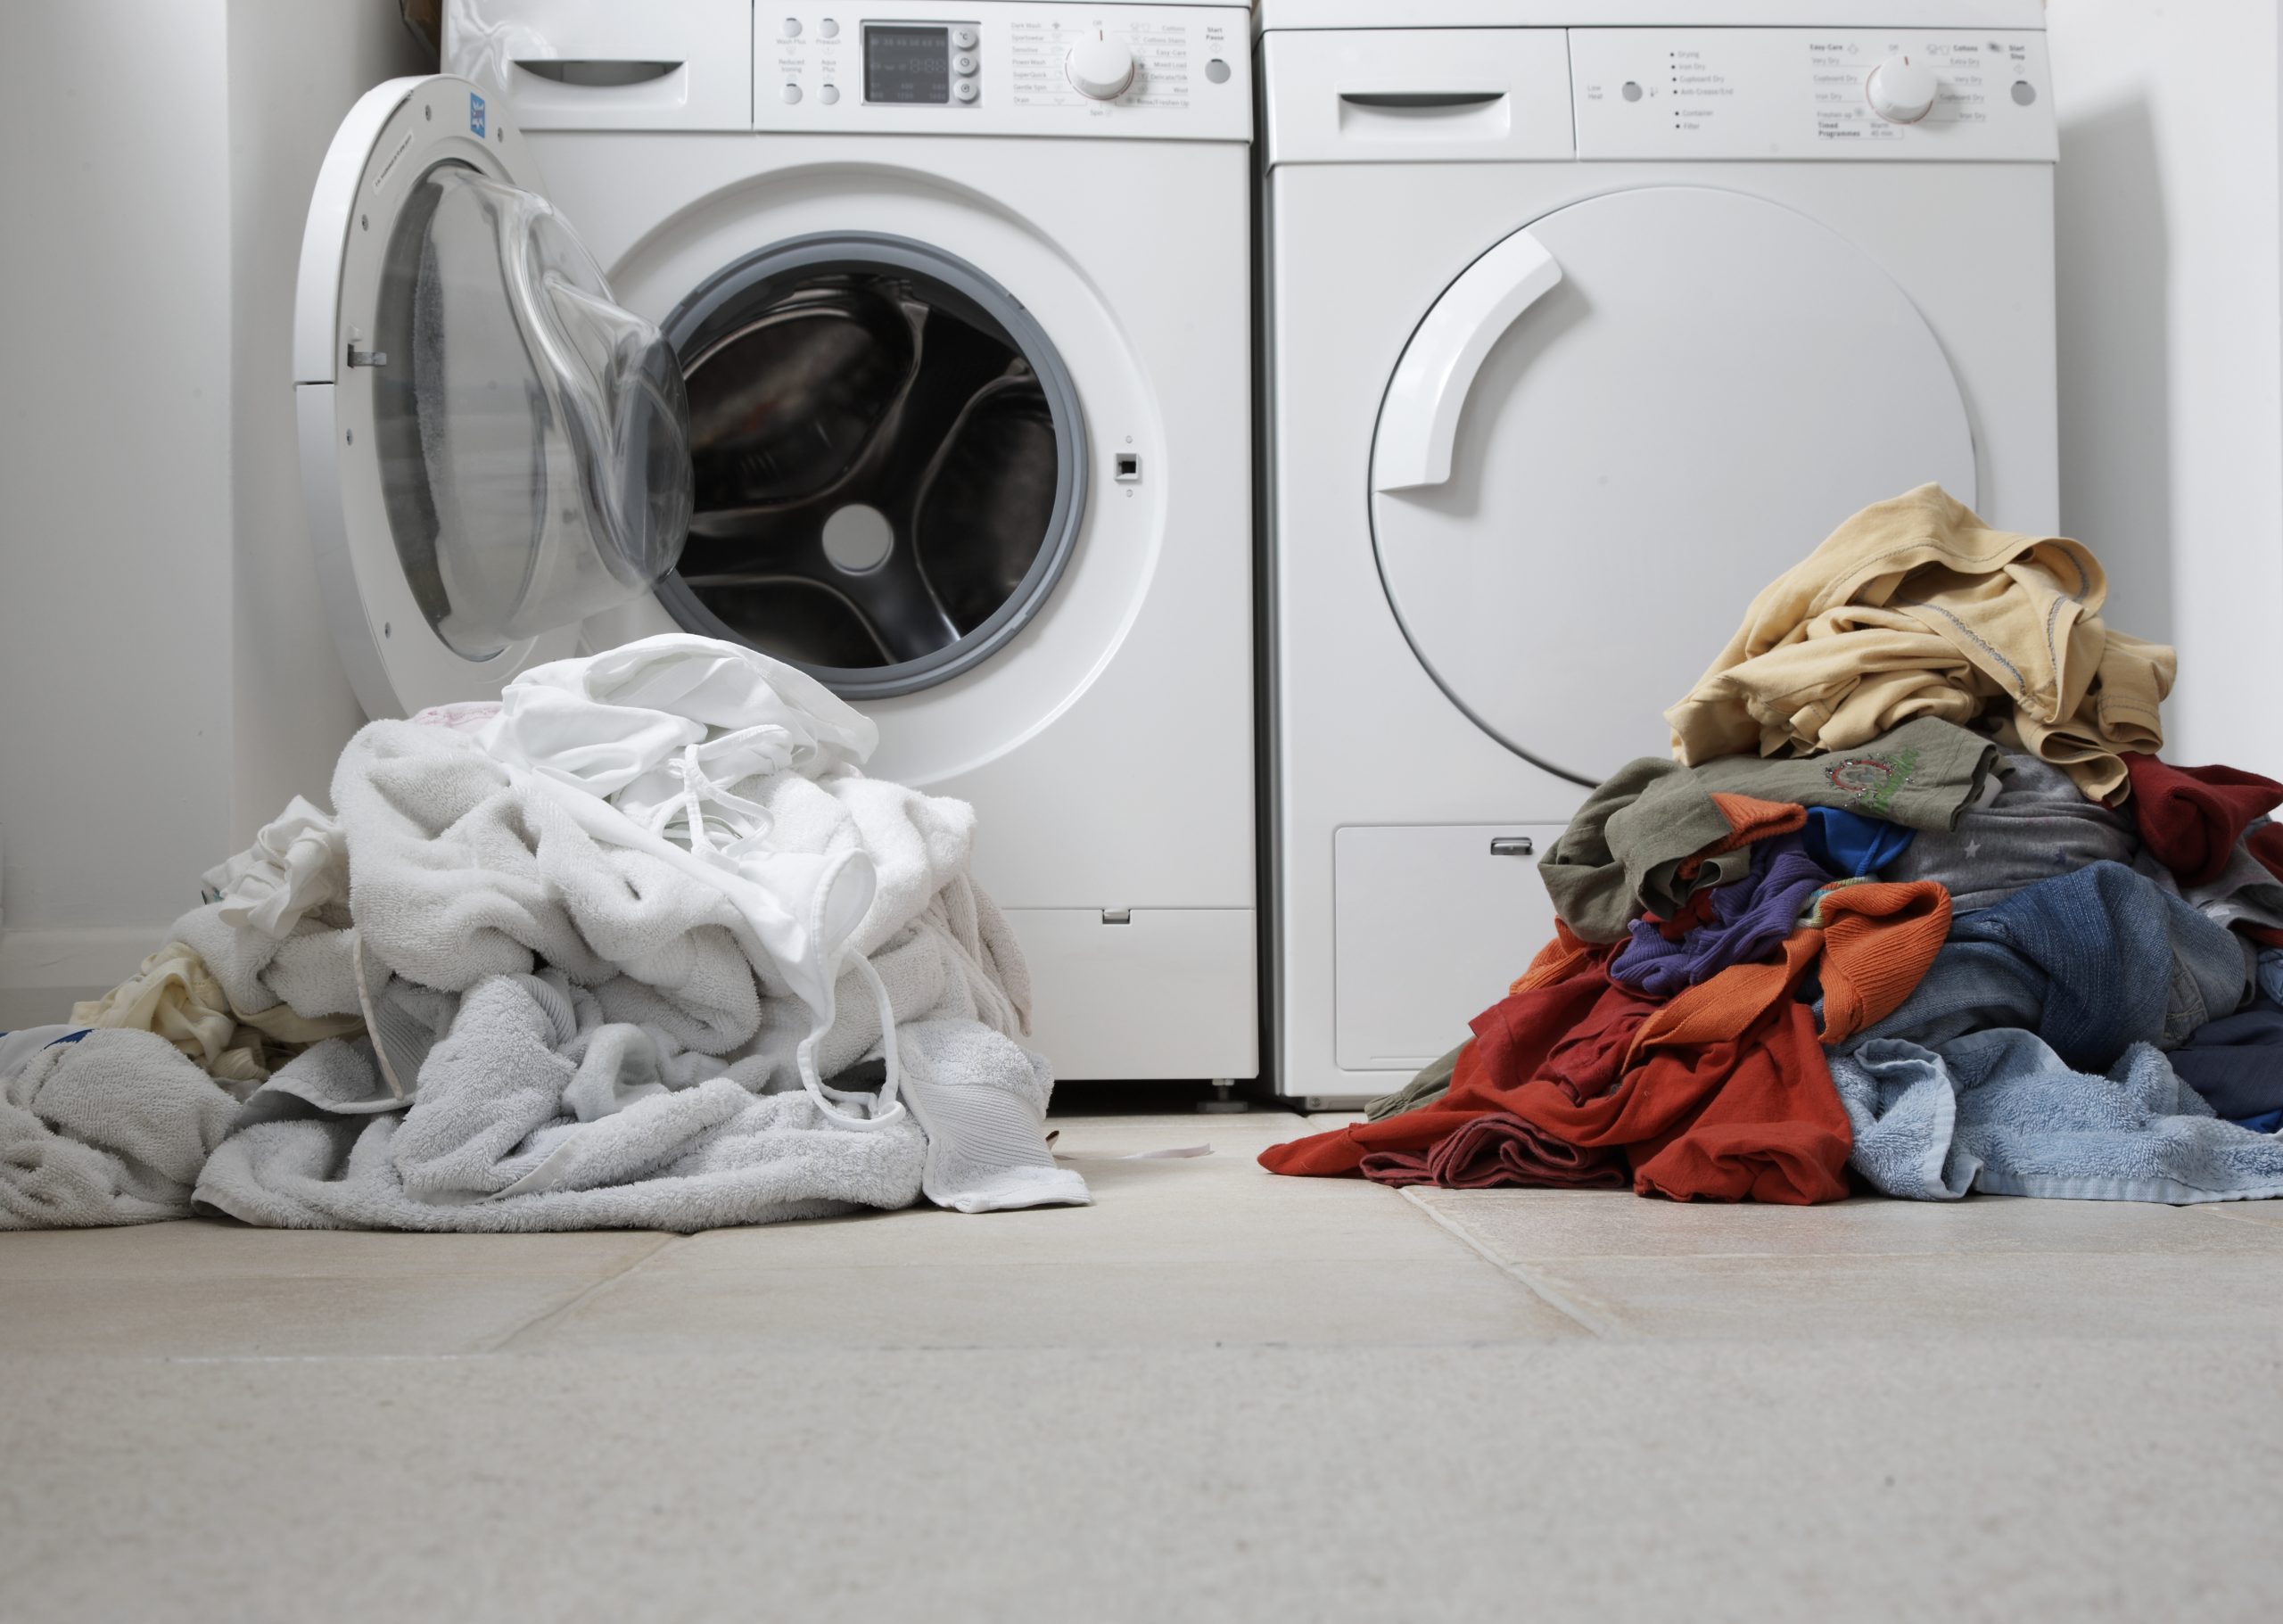 I’m a laundry expert… here’s how to remove pesky stains using a £1 common household item